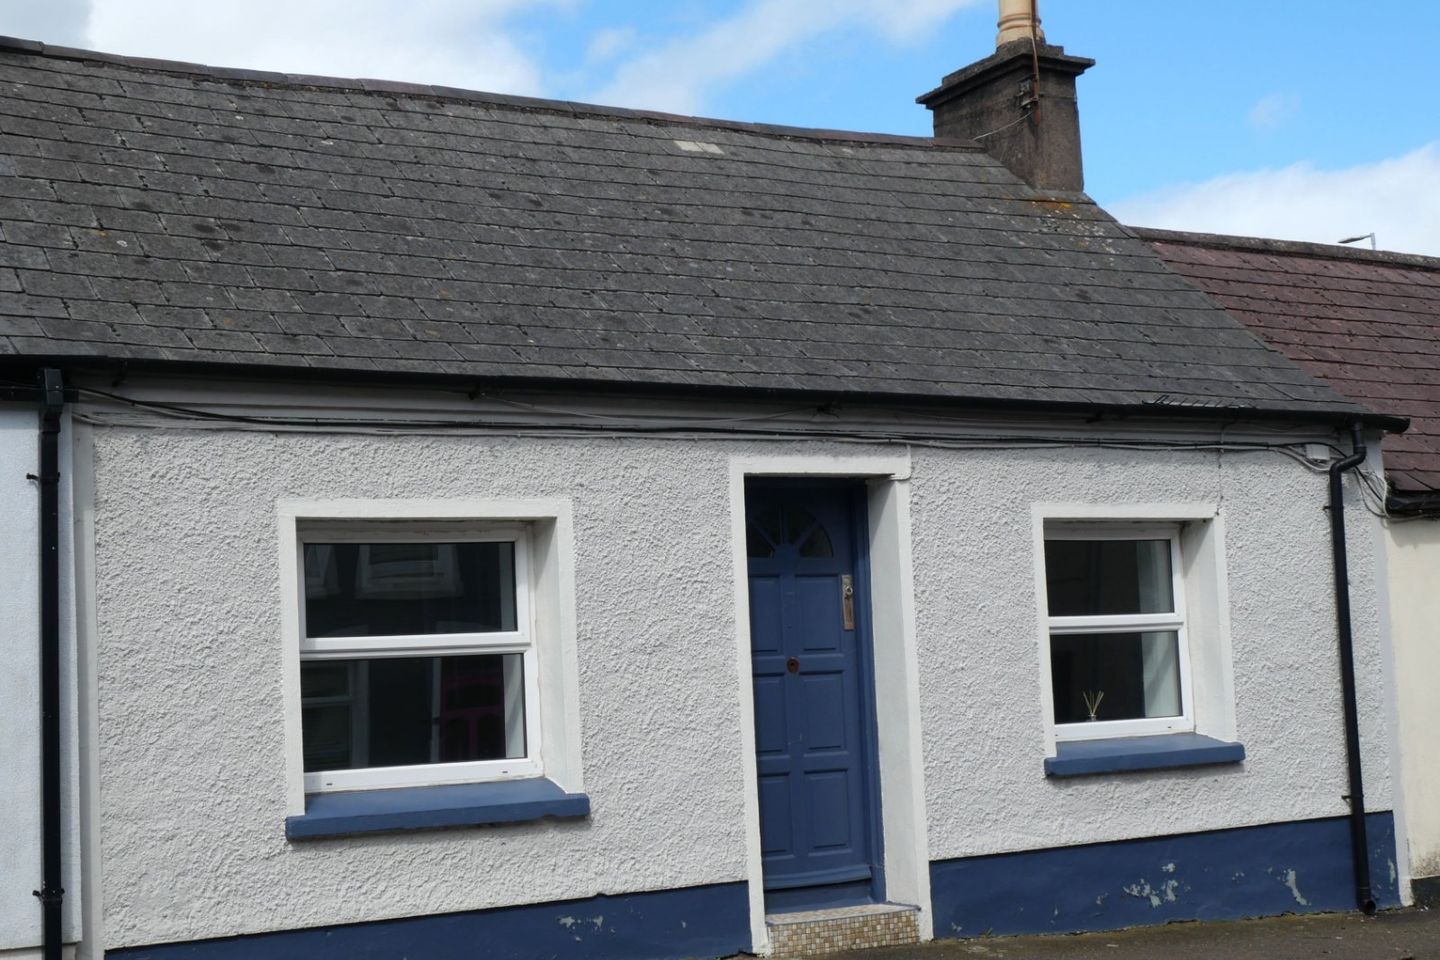 219 Old Youghal Road, Youghal, Co. Cork